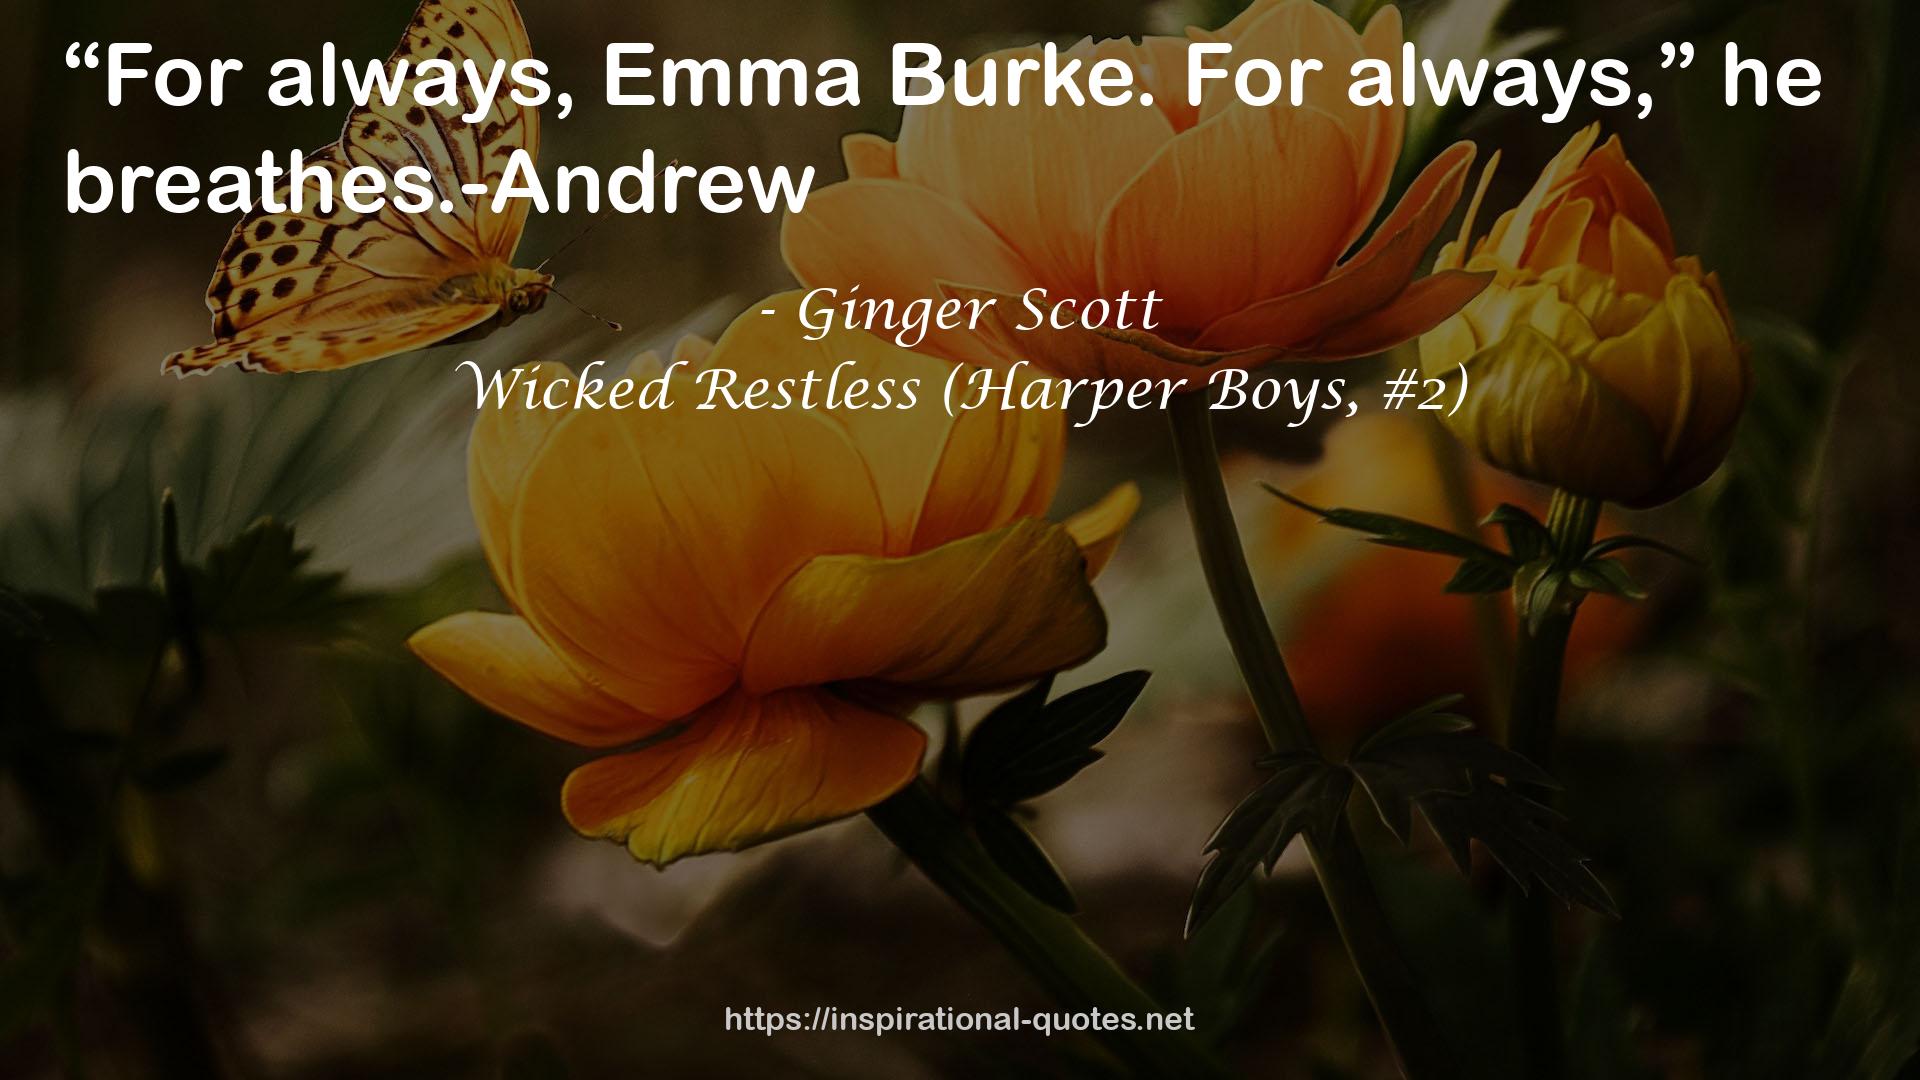 Wicked Restless (Harper Boys, #2) QUOTES